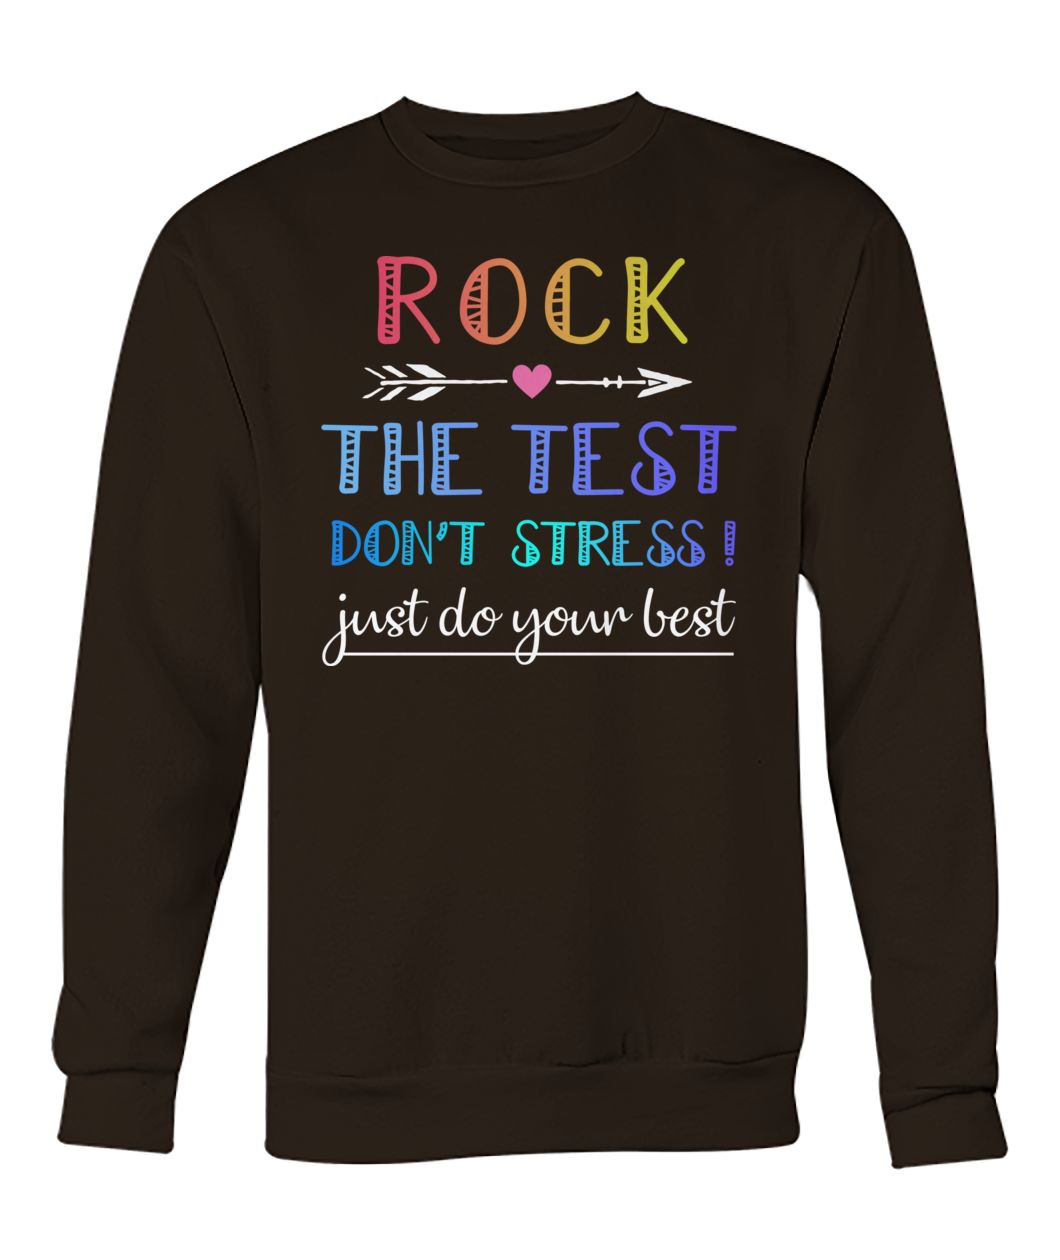 Rock the test don't stress just do your best crew neck sweatshirt